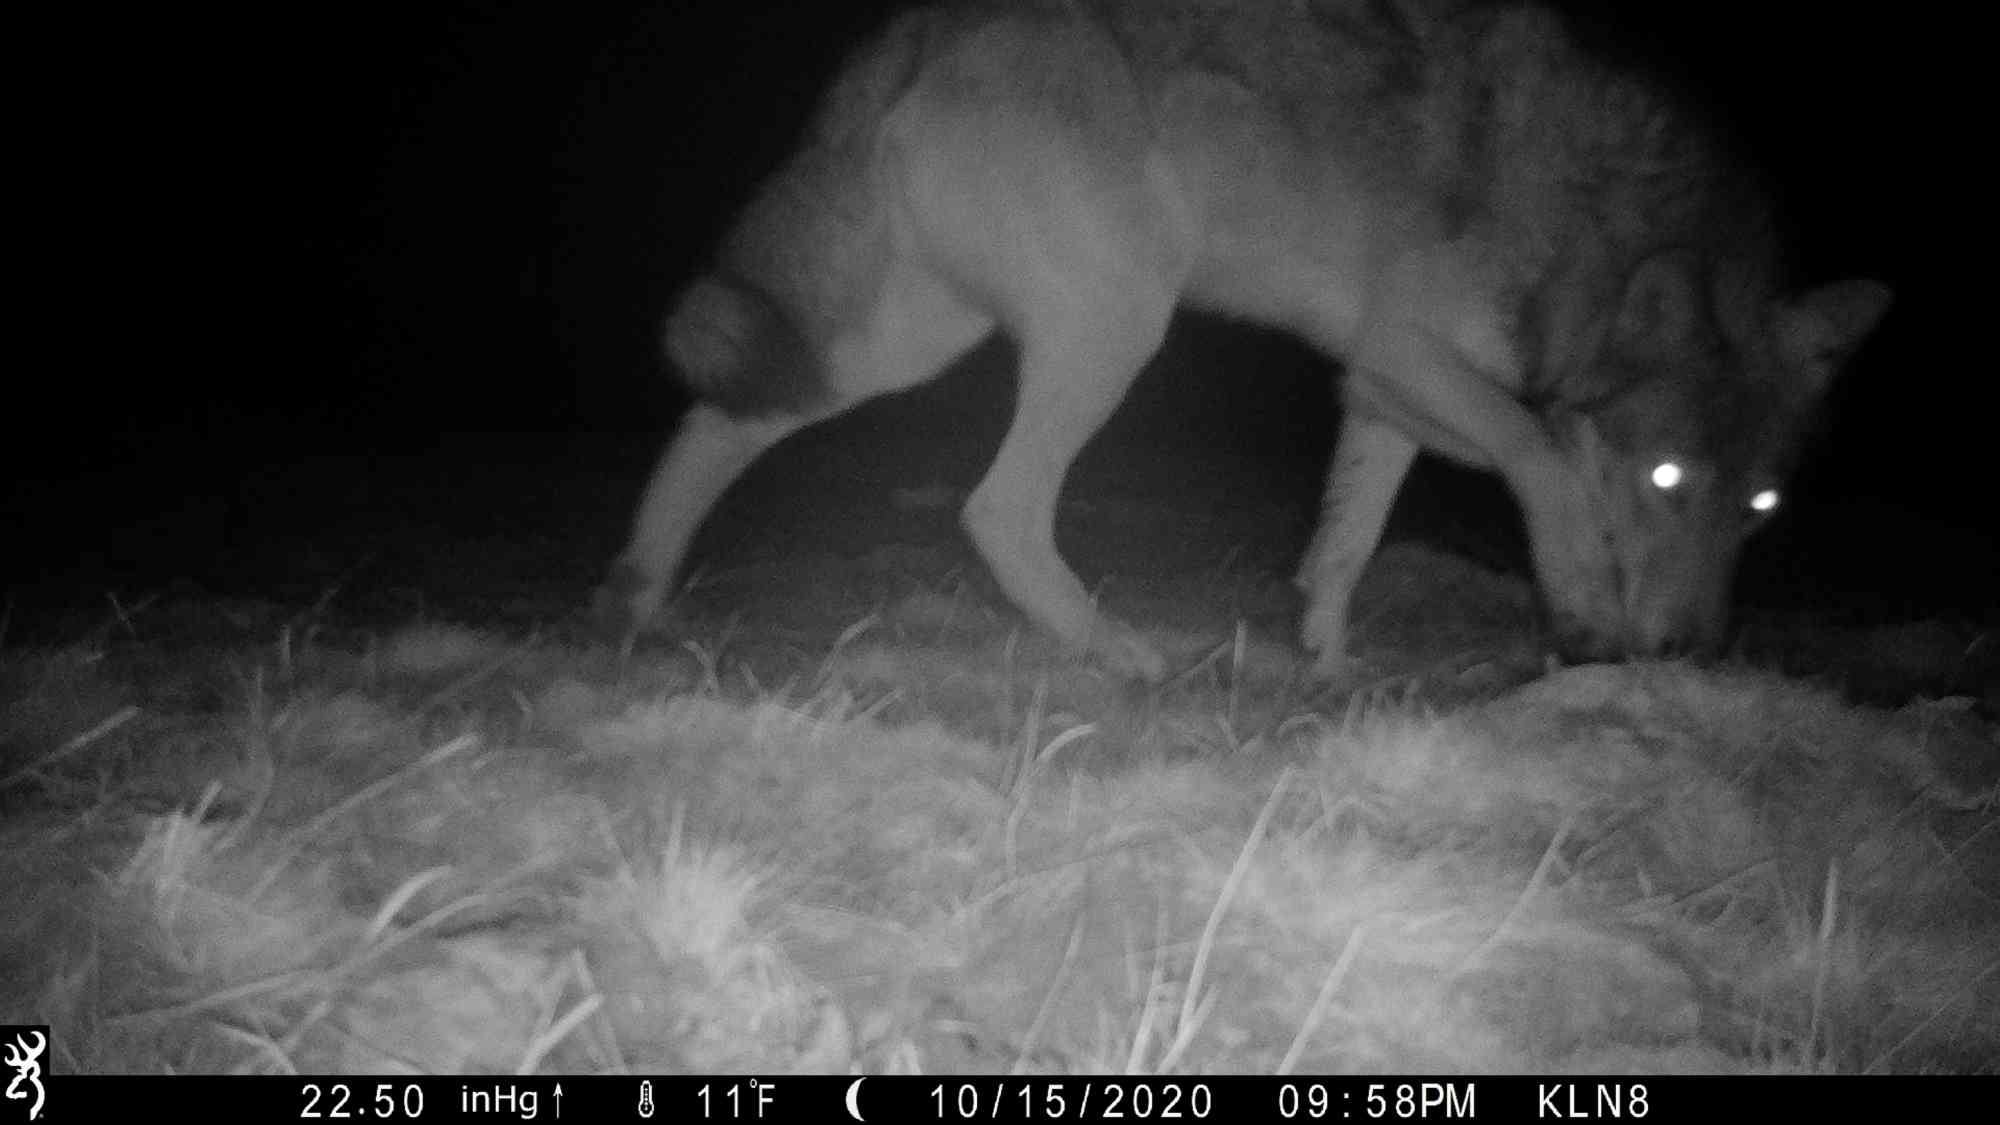 2020.10.15 - Gray wolf caught on camera trap sniffing - Northwest Colorado - Defenders of Wildlife